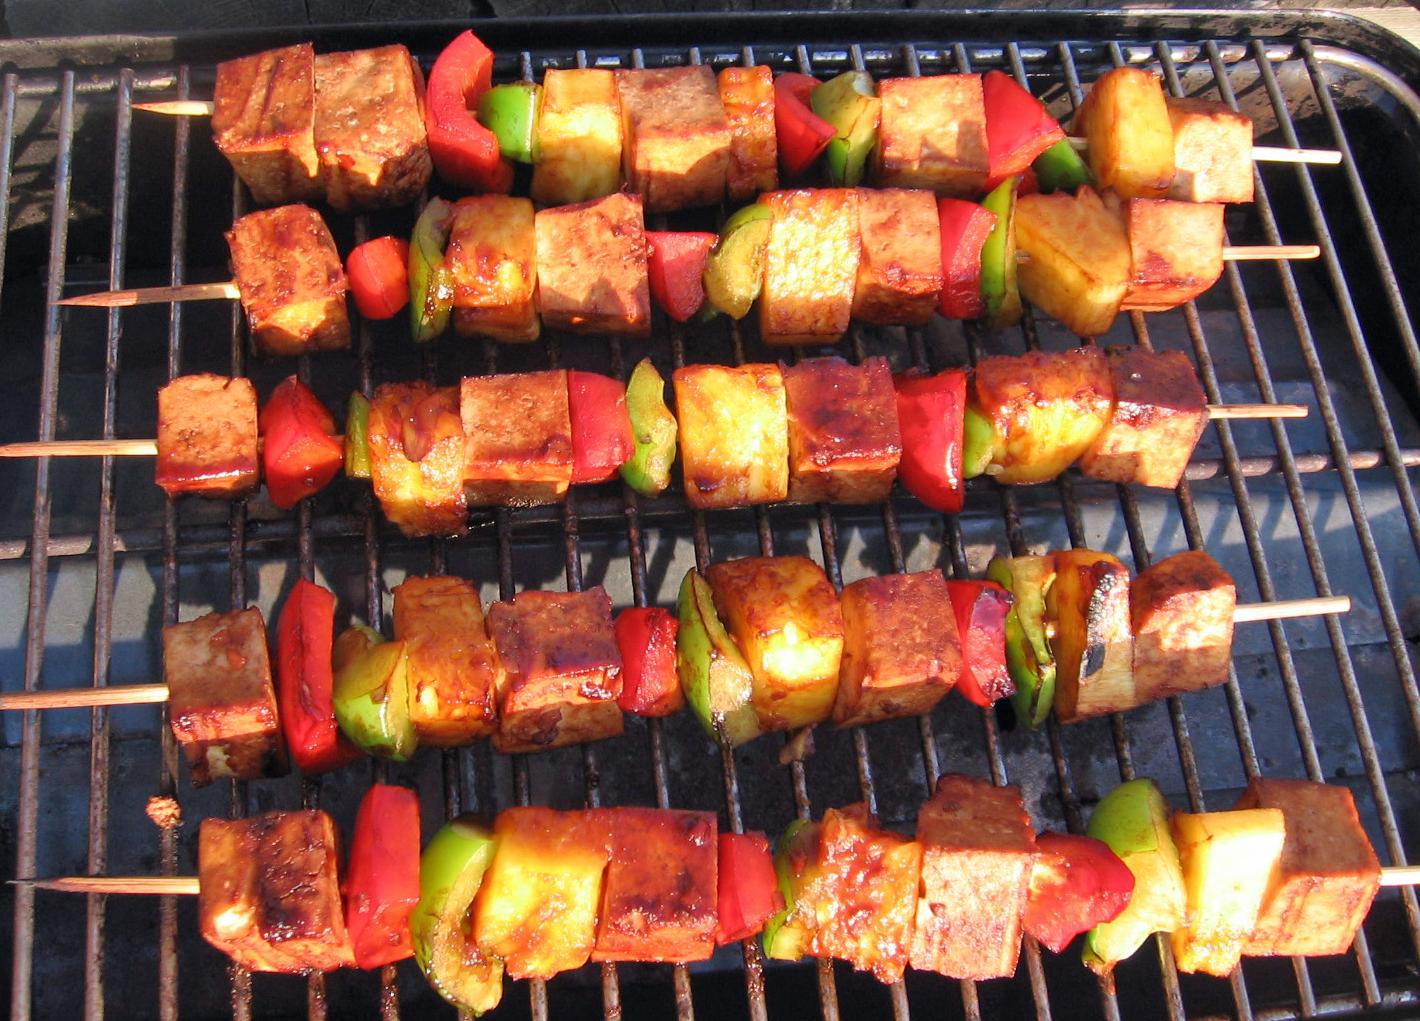  These kebabs are like a tropical vacation on a stick